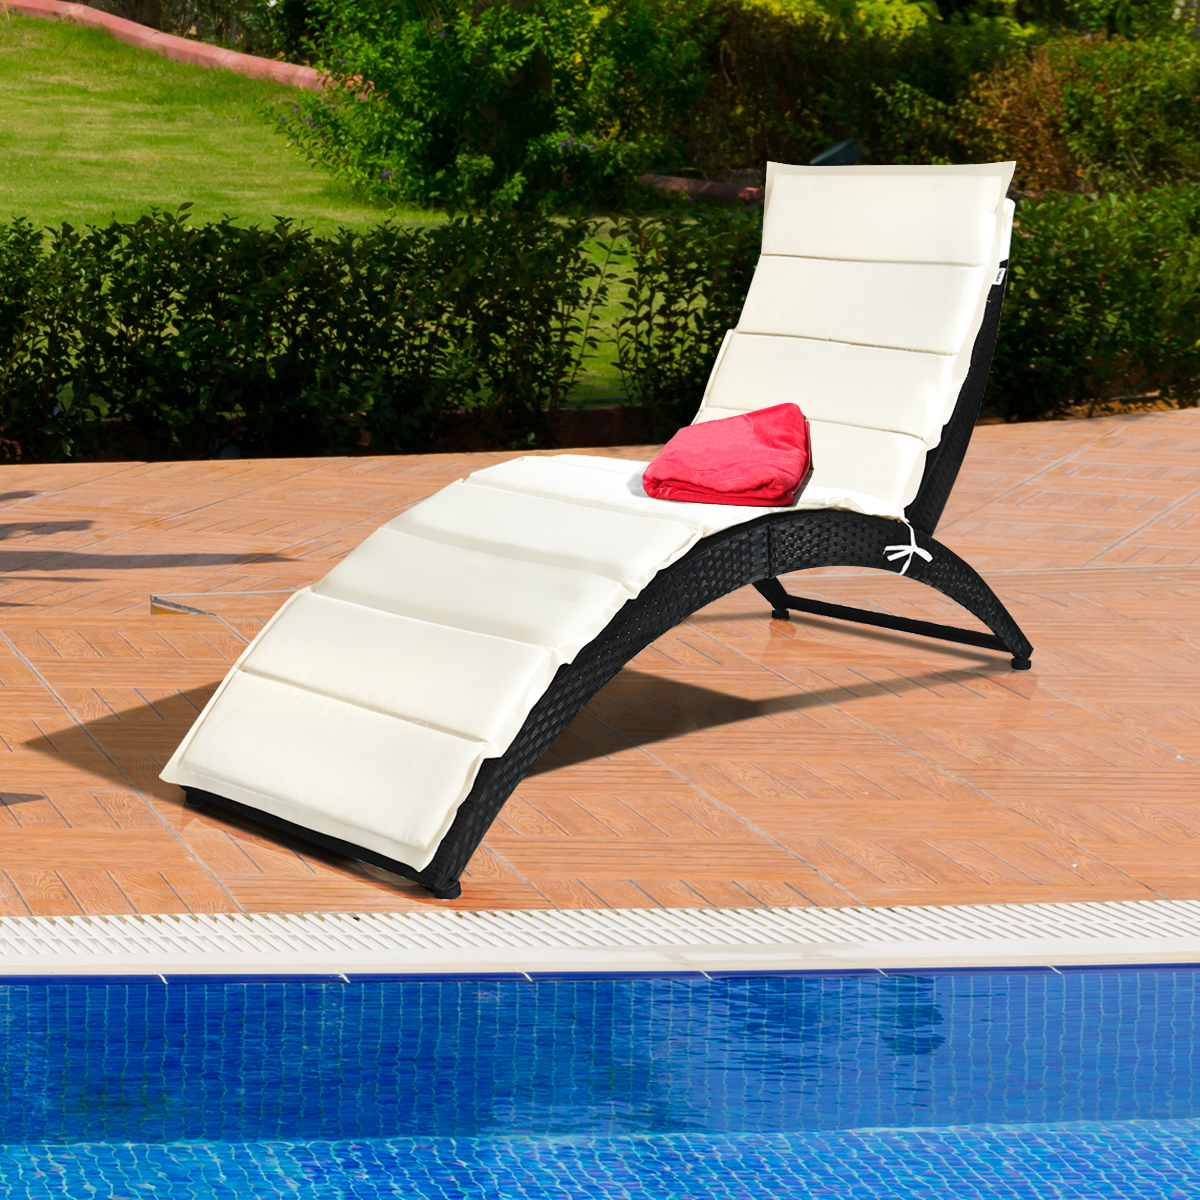 Foldable Rattan Wicker Chaise Lounge Chair W/ Cushion Patio Outdoor